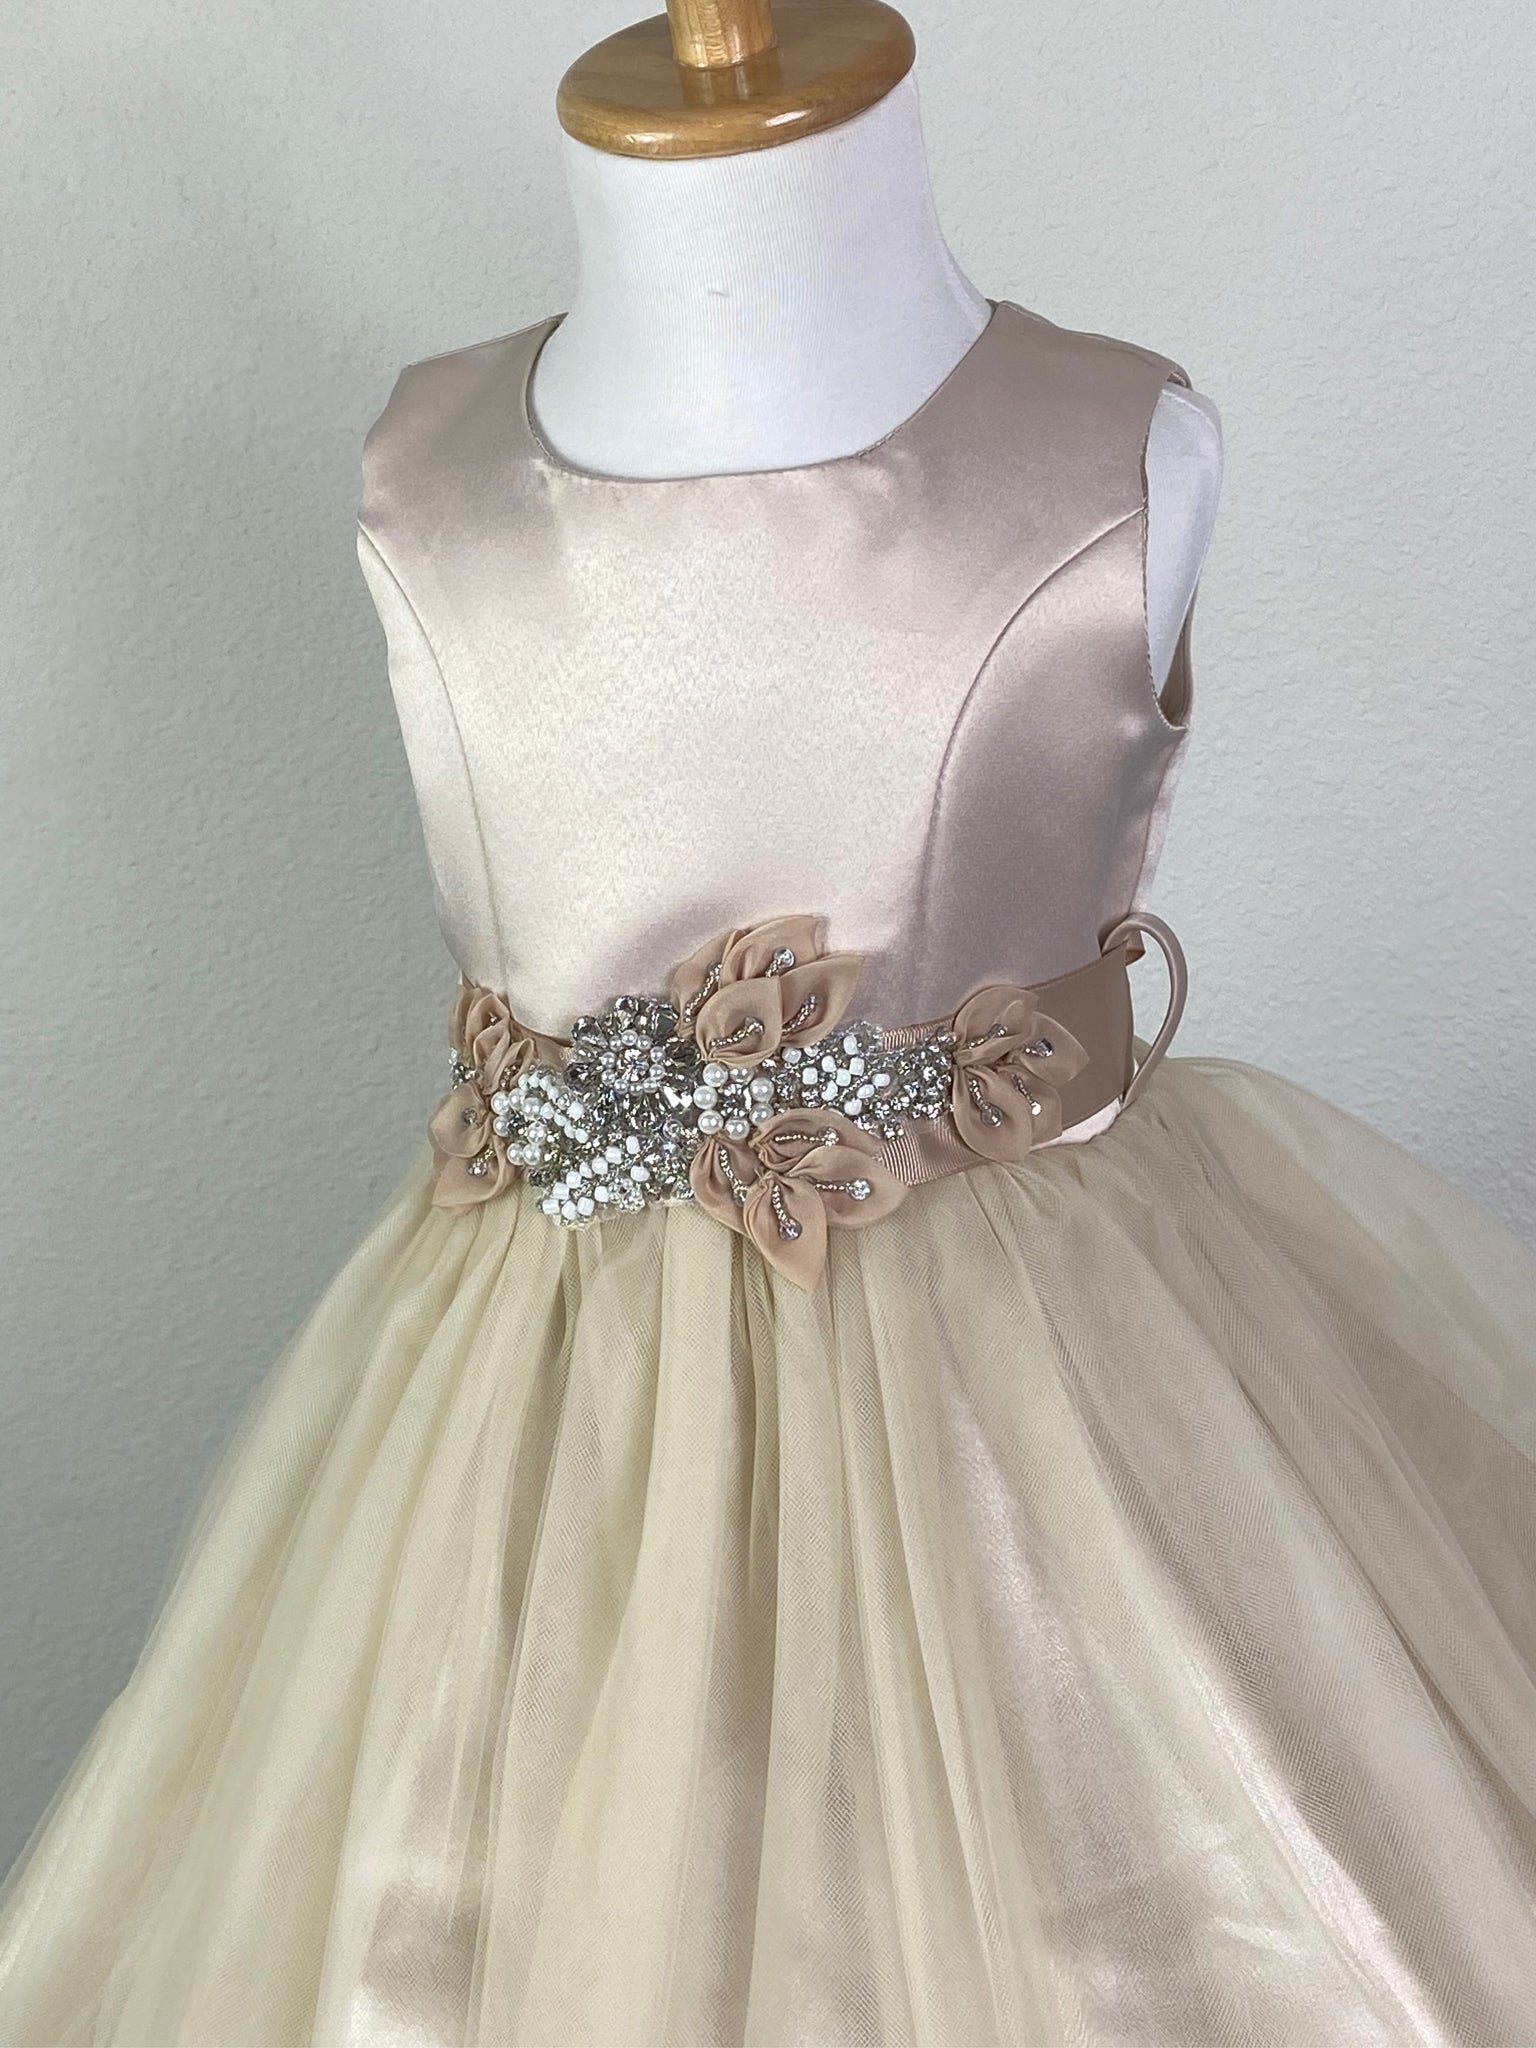 Champagne, size 2 Champagne paneled bodice Beige ribbon belt with rhinestone and bead detailing along leaves Champagne satin skirting with tulle overlay Zipper closure Dress pictured with a petticoat Petticoat not included  Choose from a tulle, cloth, or wire for best look